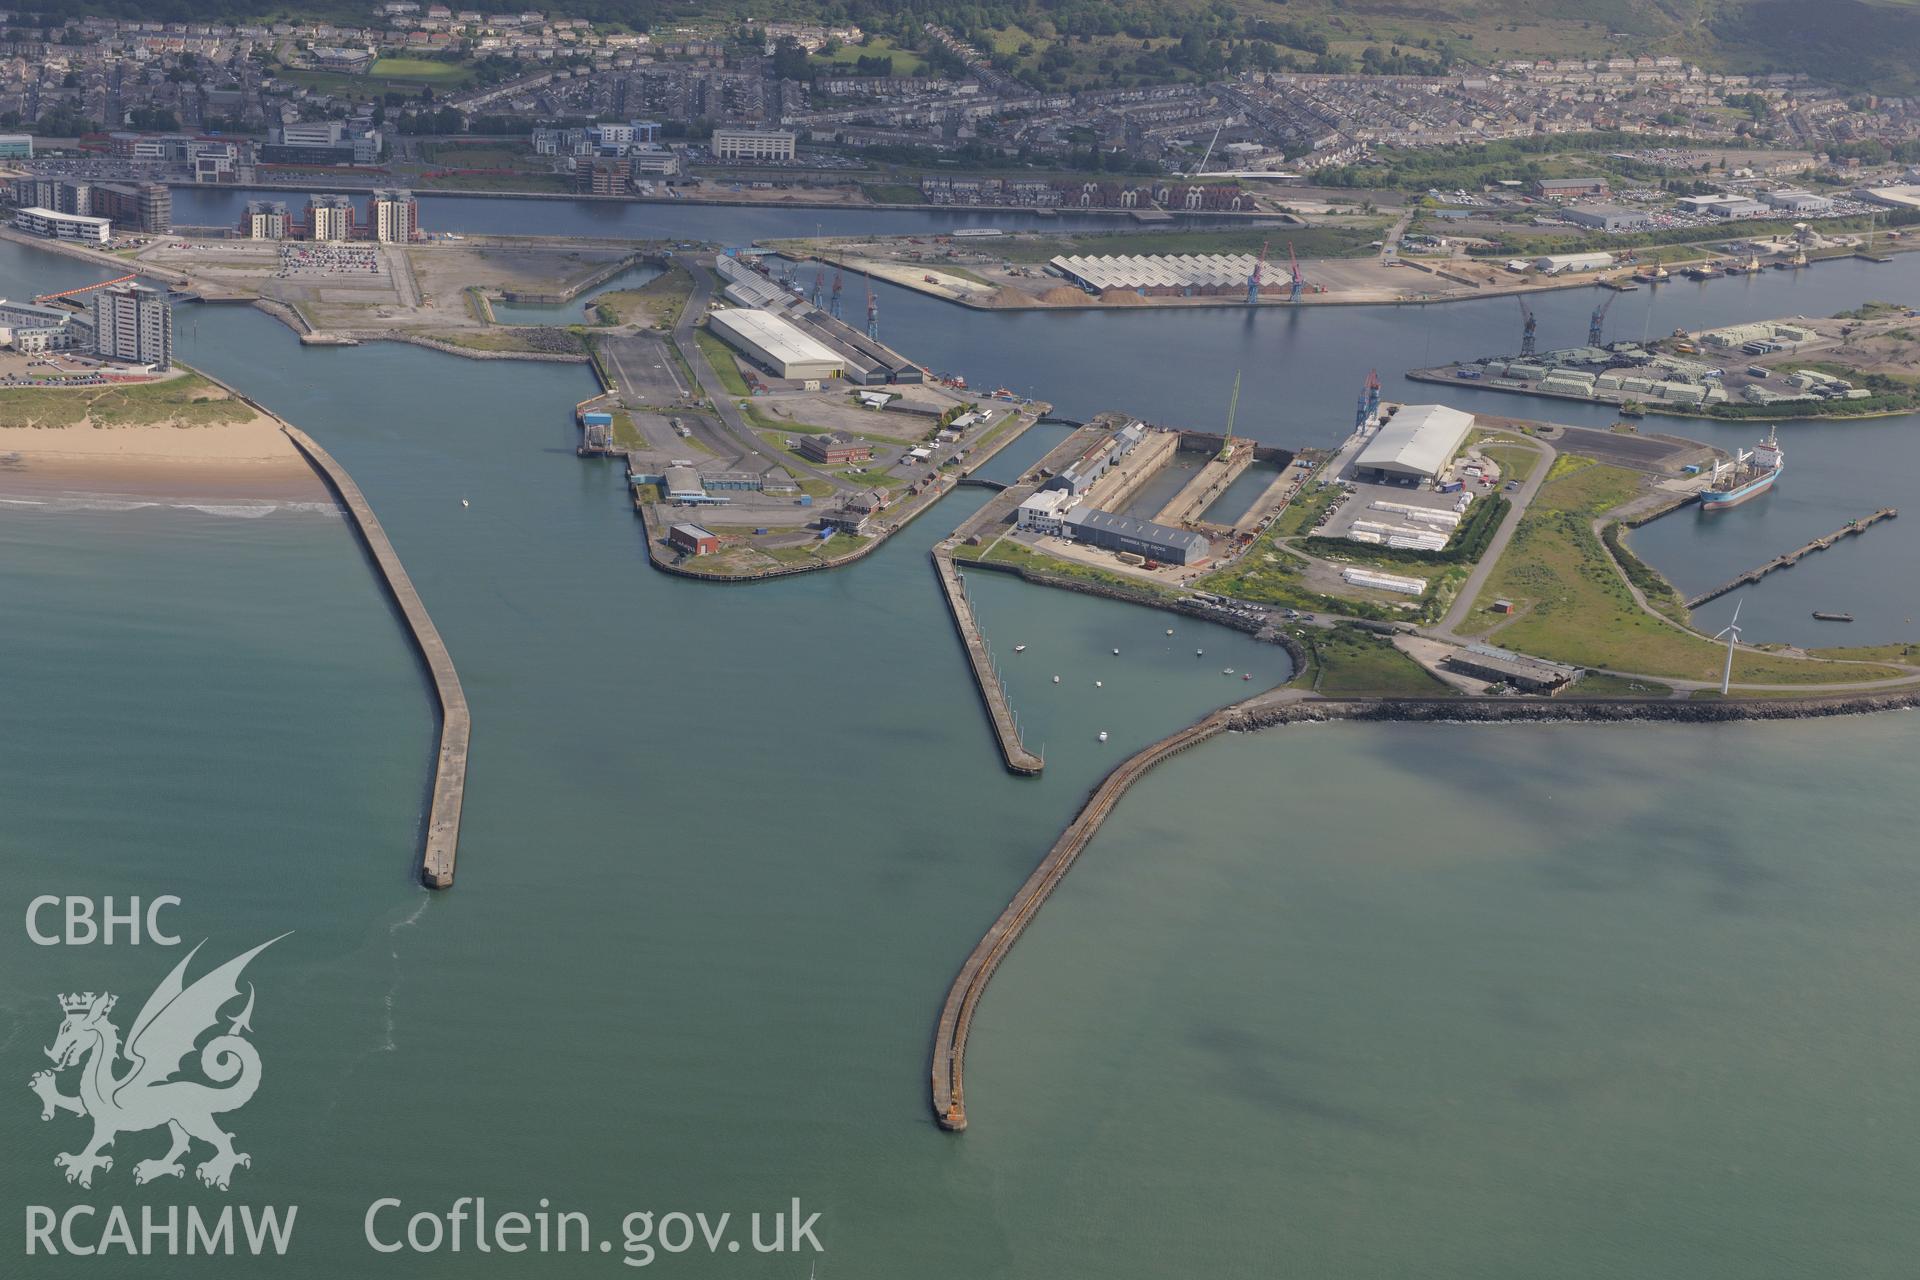 Swansea docks including the King's Dock, Queen's Dock and Prince of Wales Dock, with the city of Swansea in the distance. Oblique aerial photograph taken during the Royal Commission's programme of archaeological aerial reconnaissance by Toby Driver on 19th June 2015.